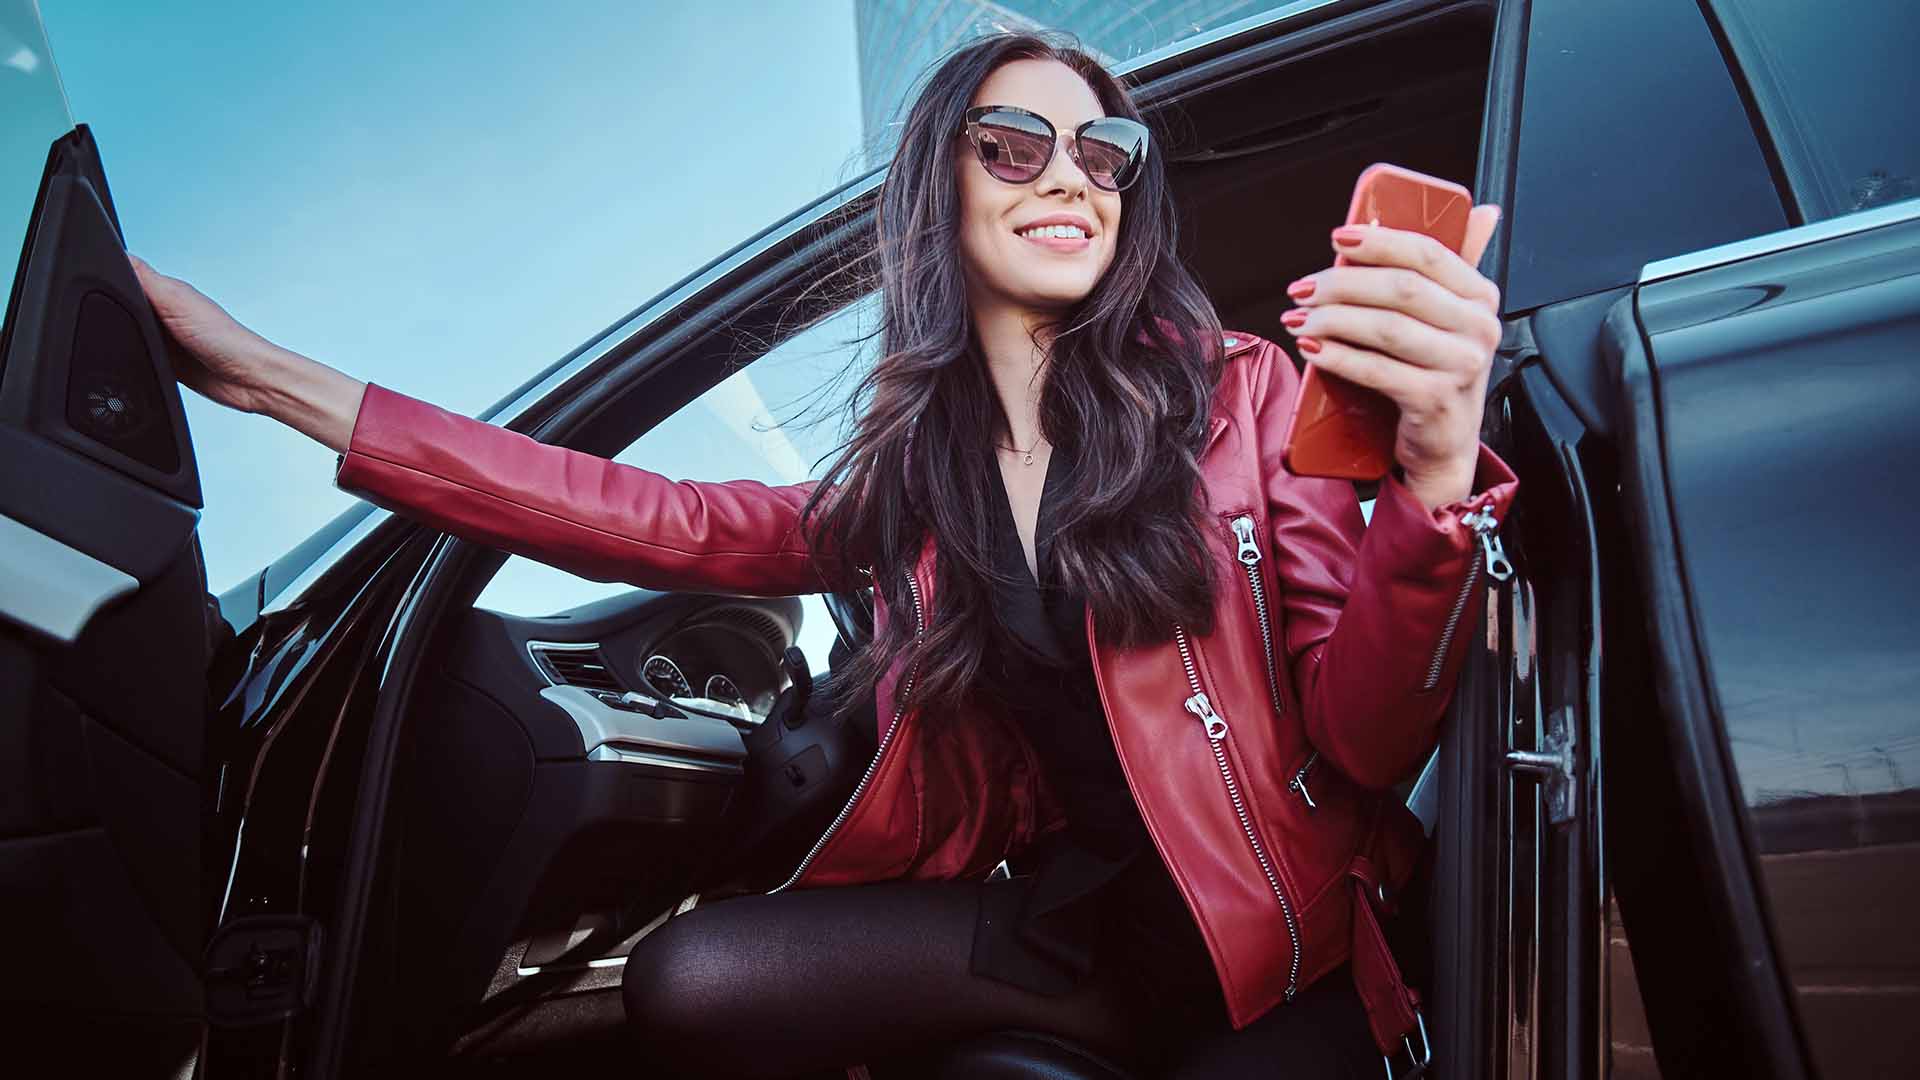 Woman exiting car holding phone